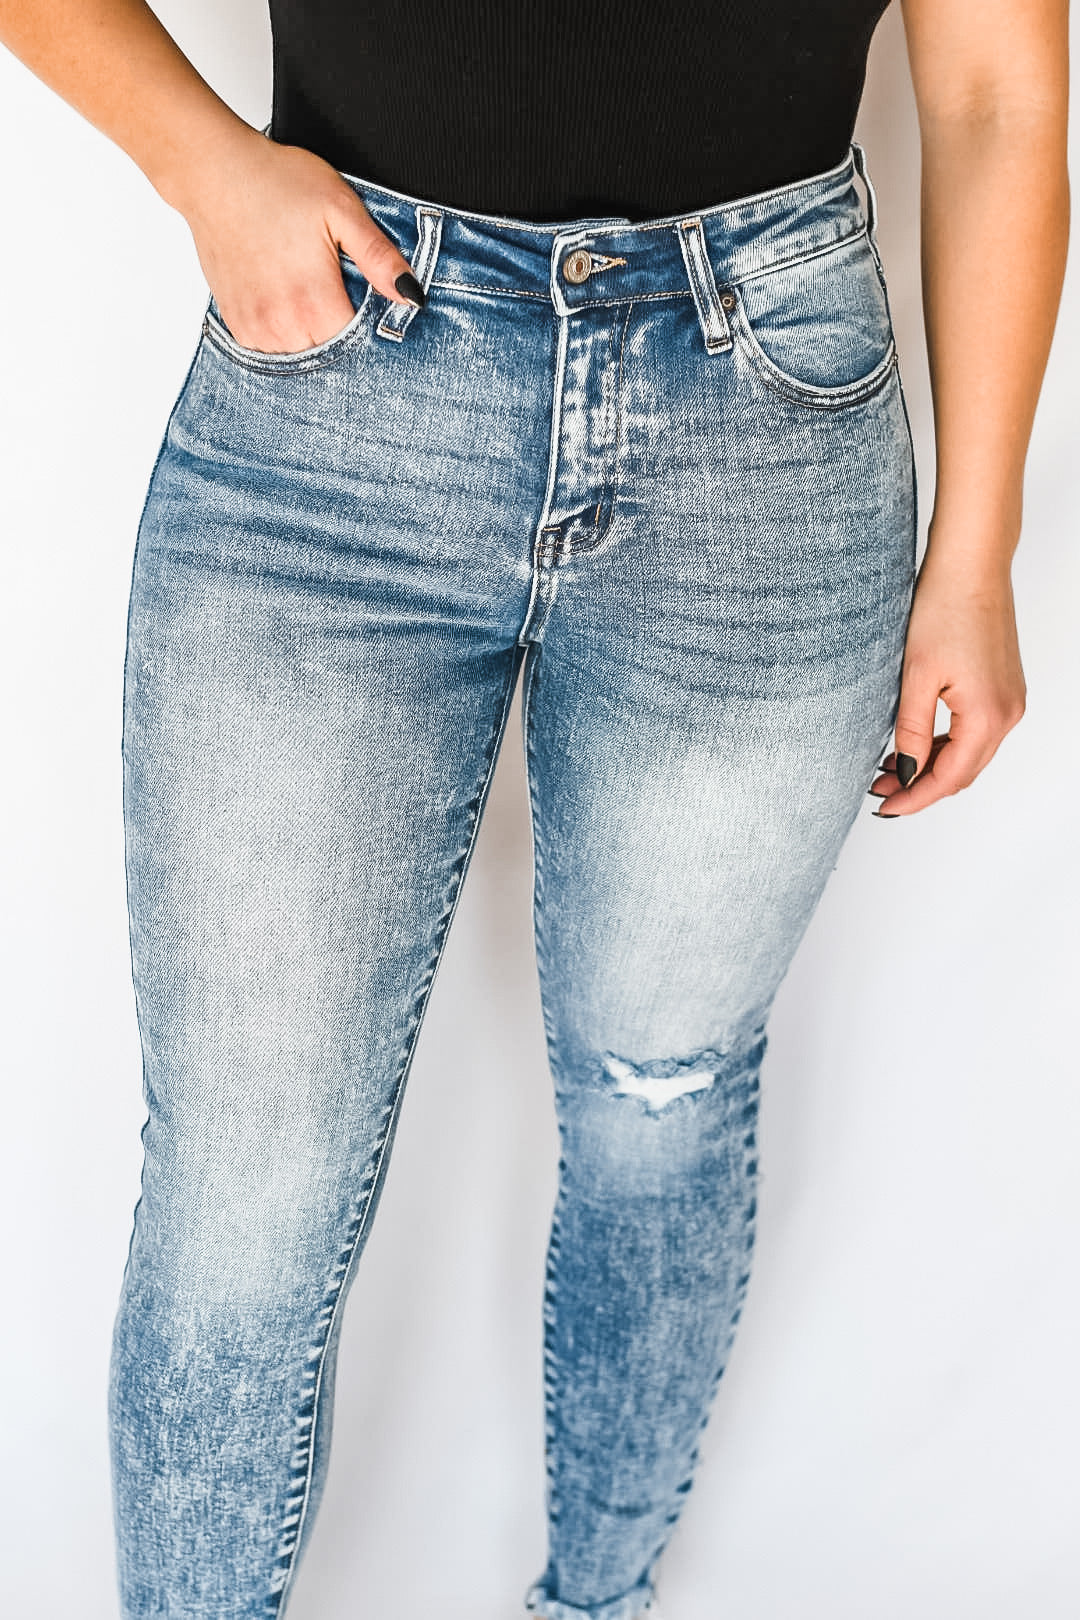 Lizzie High Rise Ankle Skinny Jeans - Medium Wash